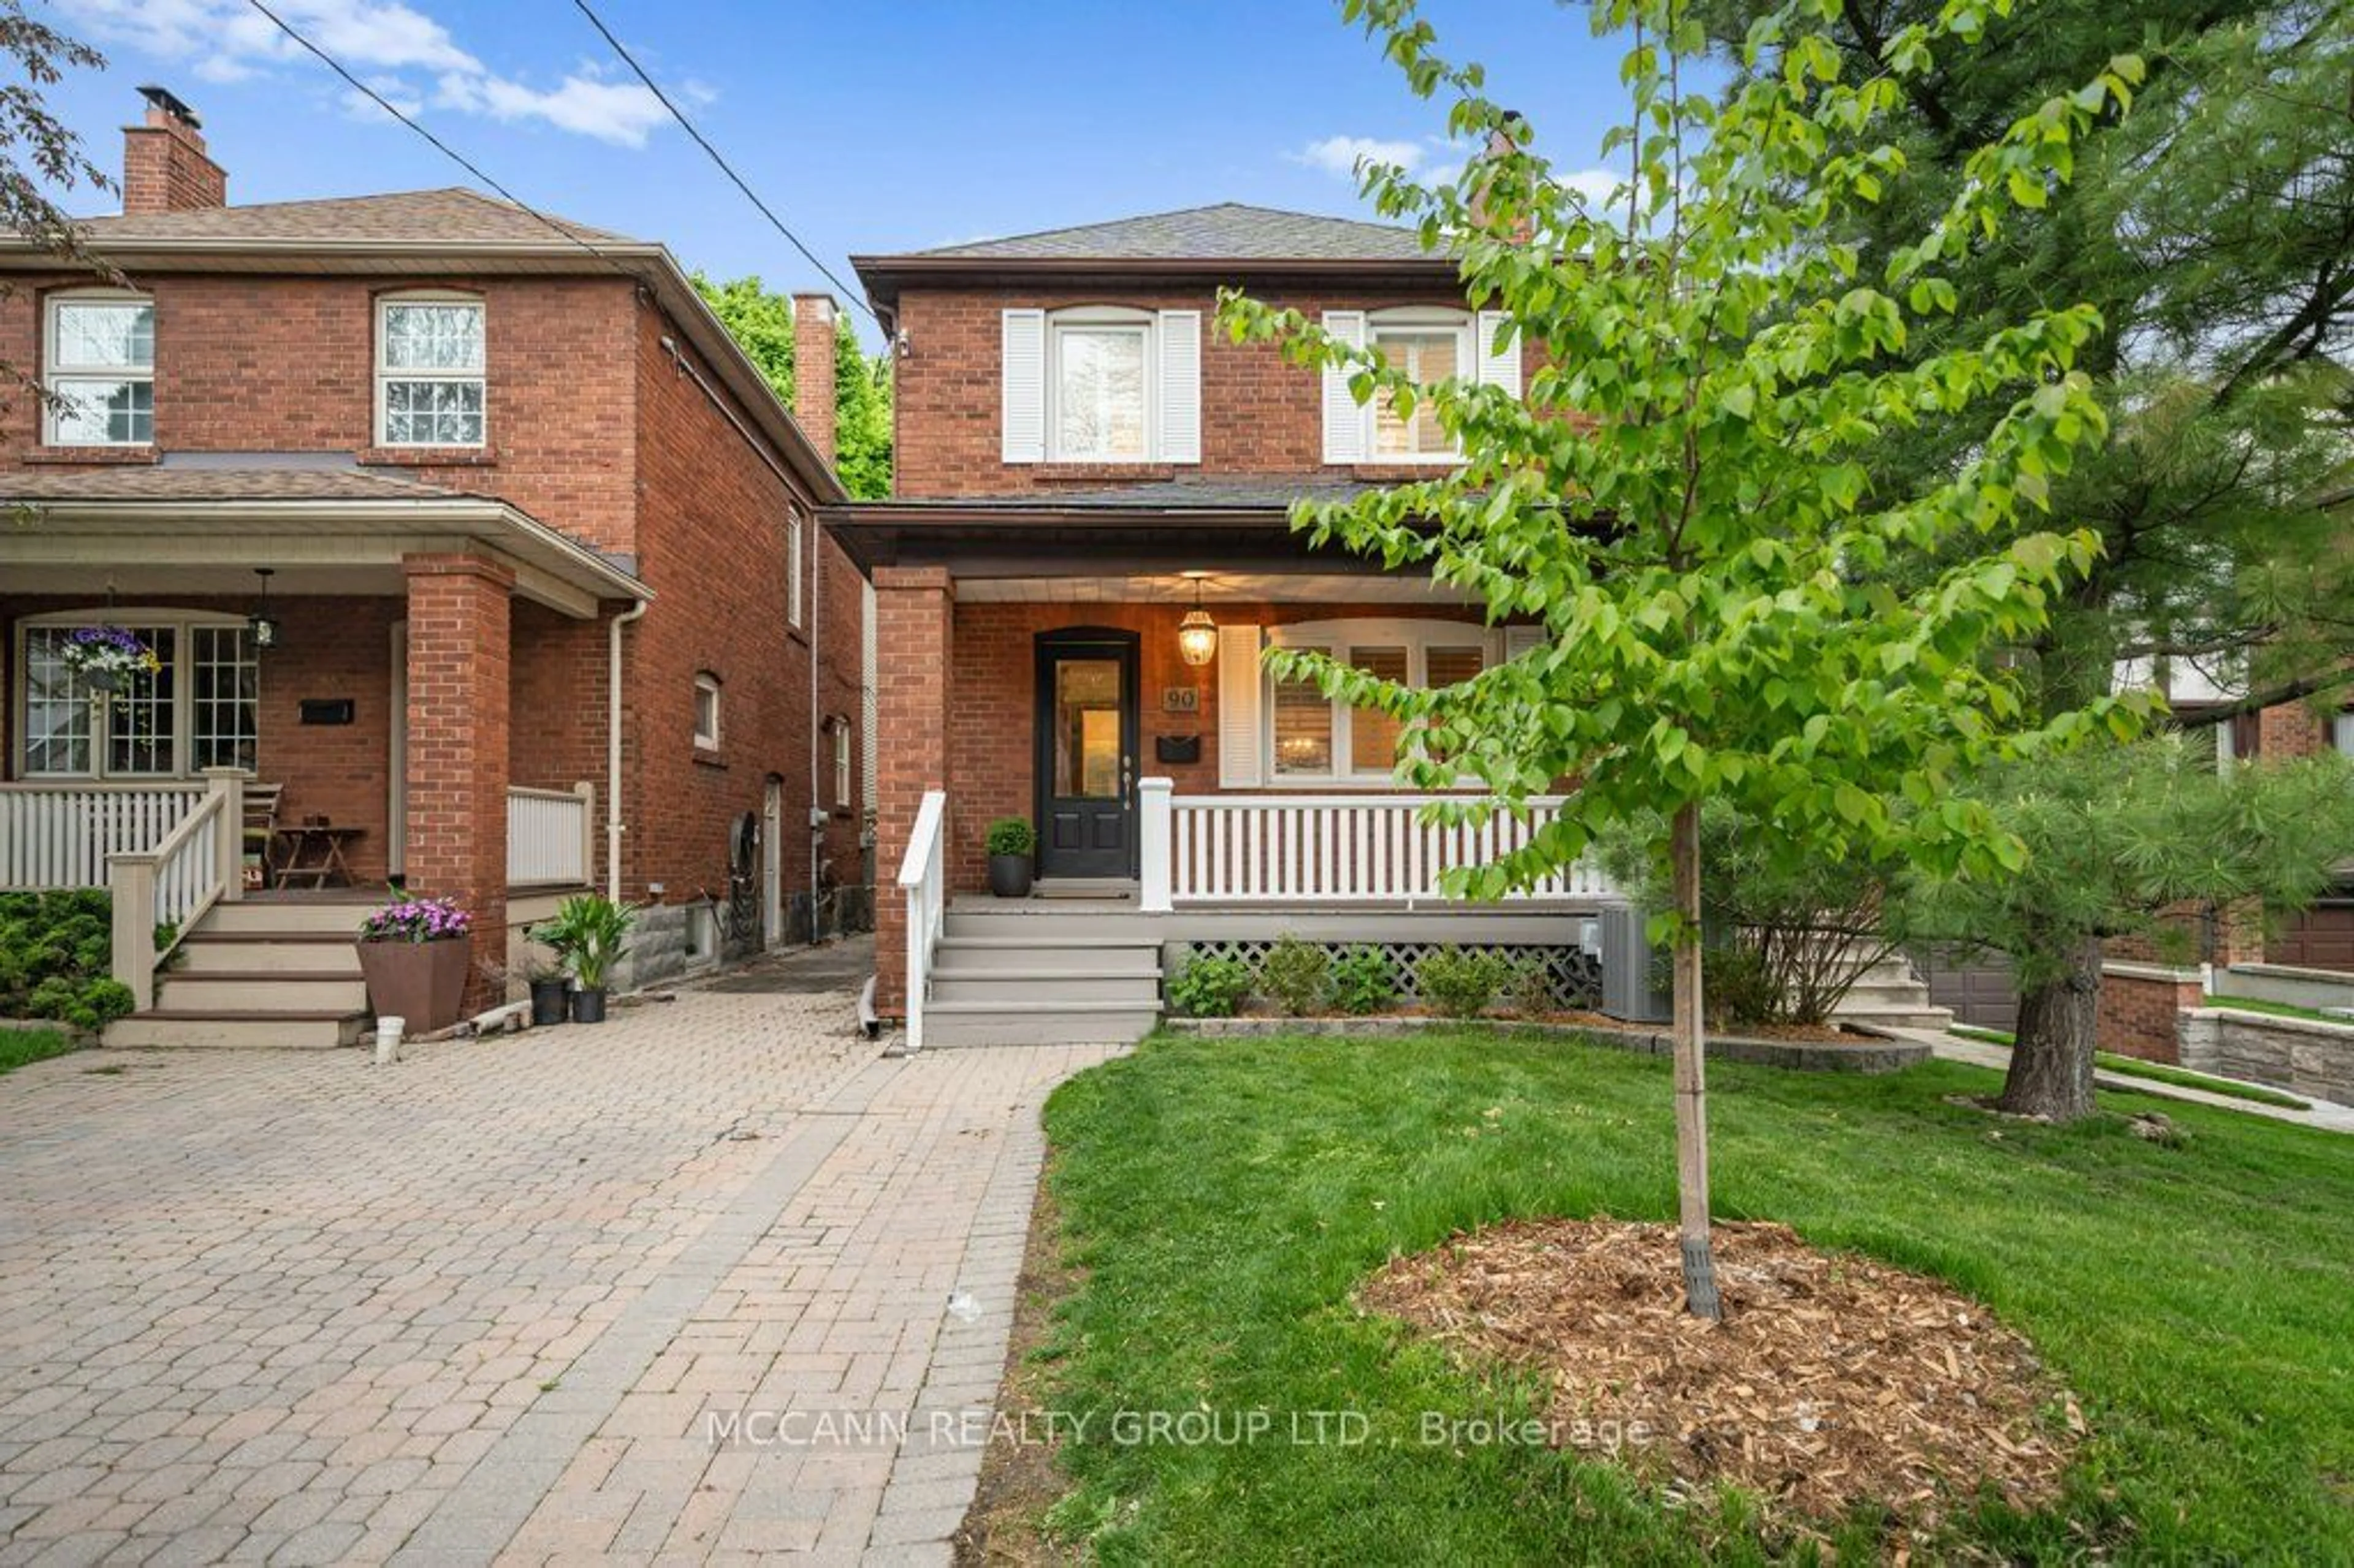 Home with brick exterior material for 90 Roslin Ave, Toronto Ontario M4N 1Z2